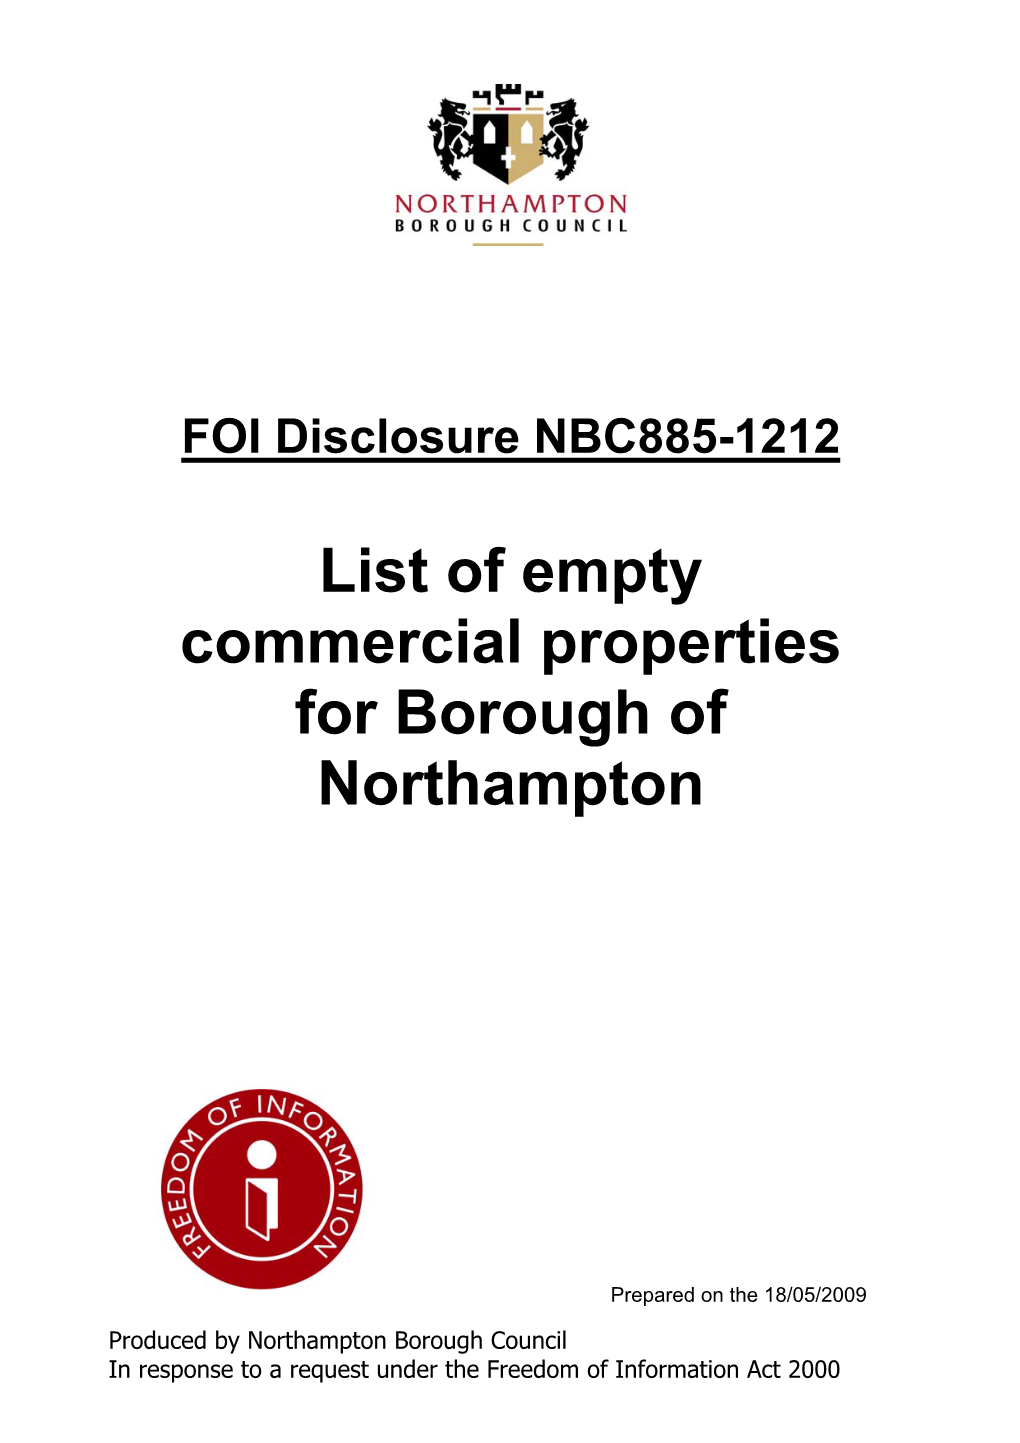 List of Empty Commercial Properties for Borough of Northampton